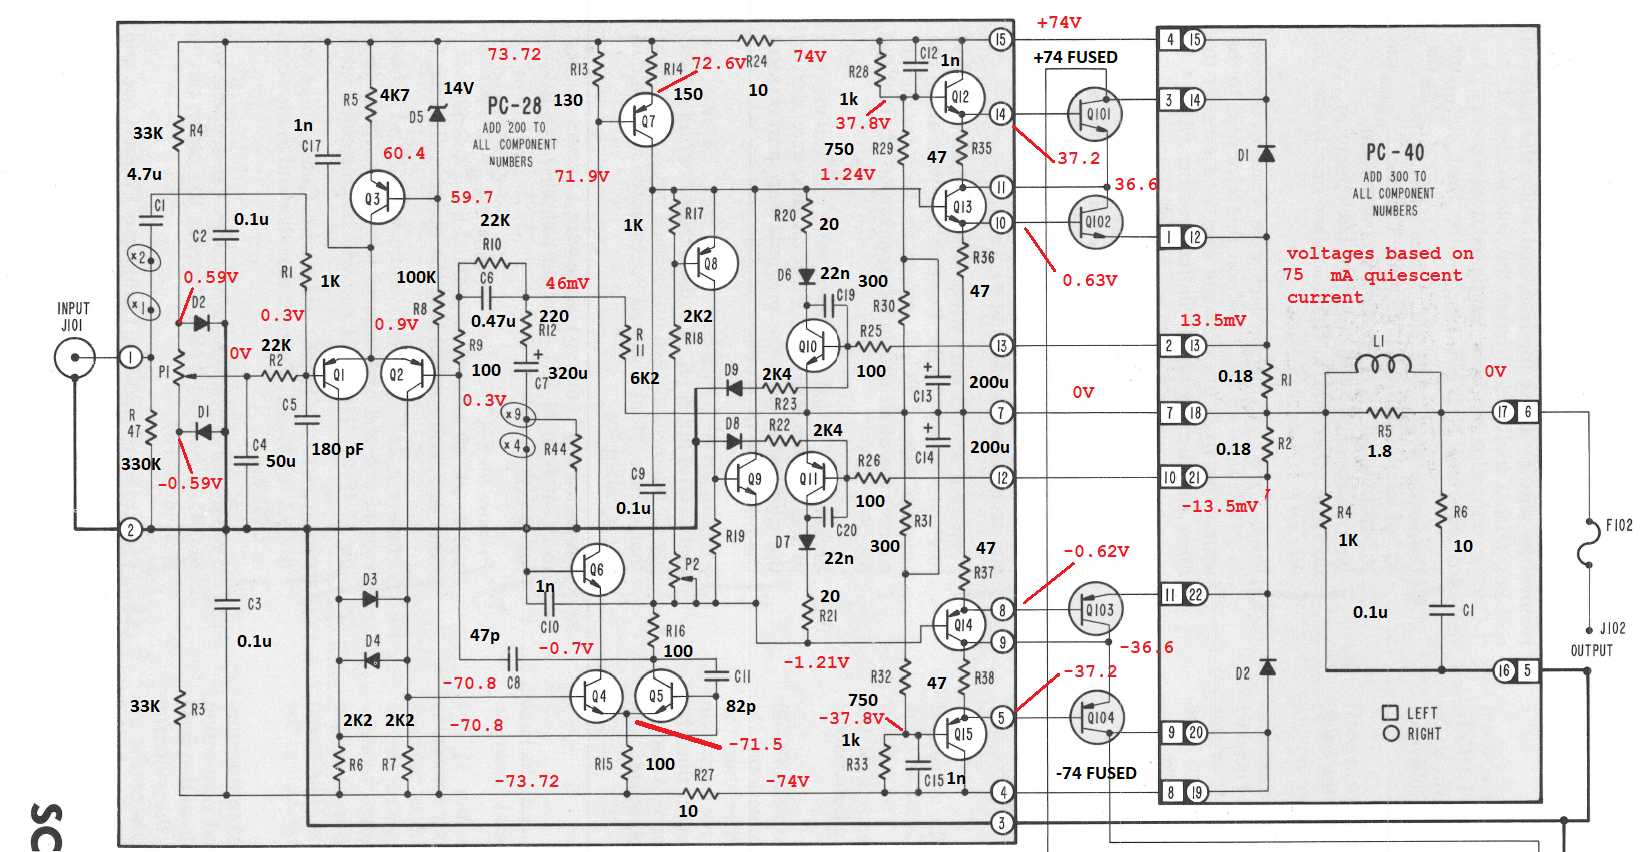 Stereo 410 schematic with annotated values and voltages